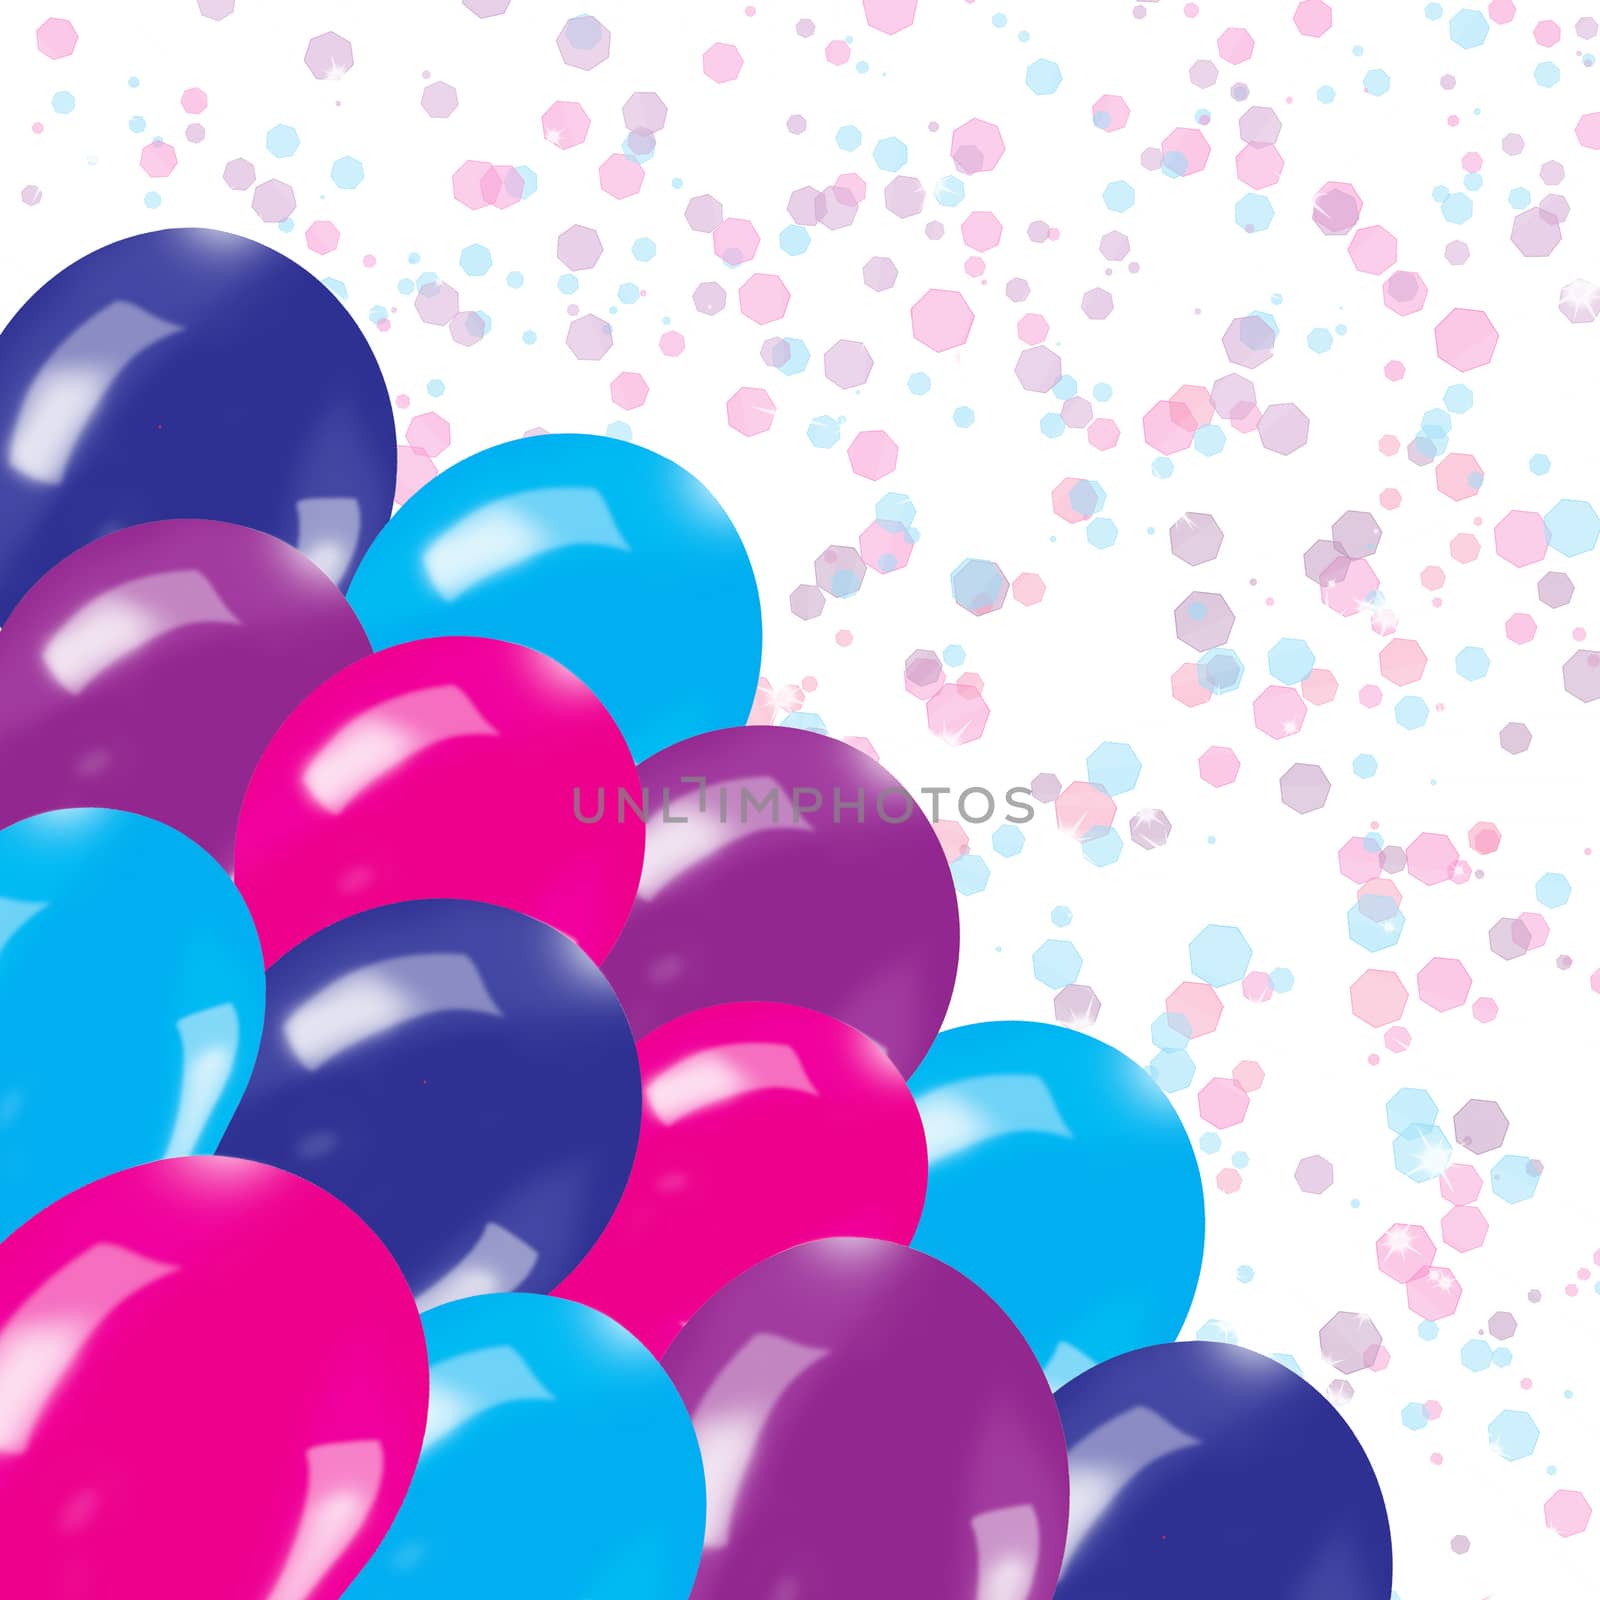 Holiday's background with balloons by EllenSmile